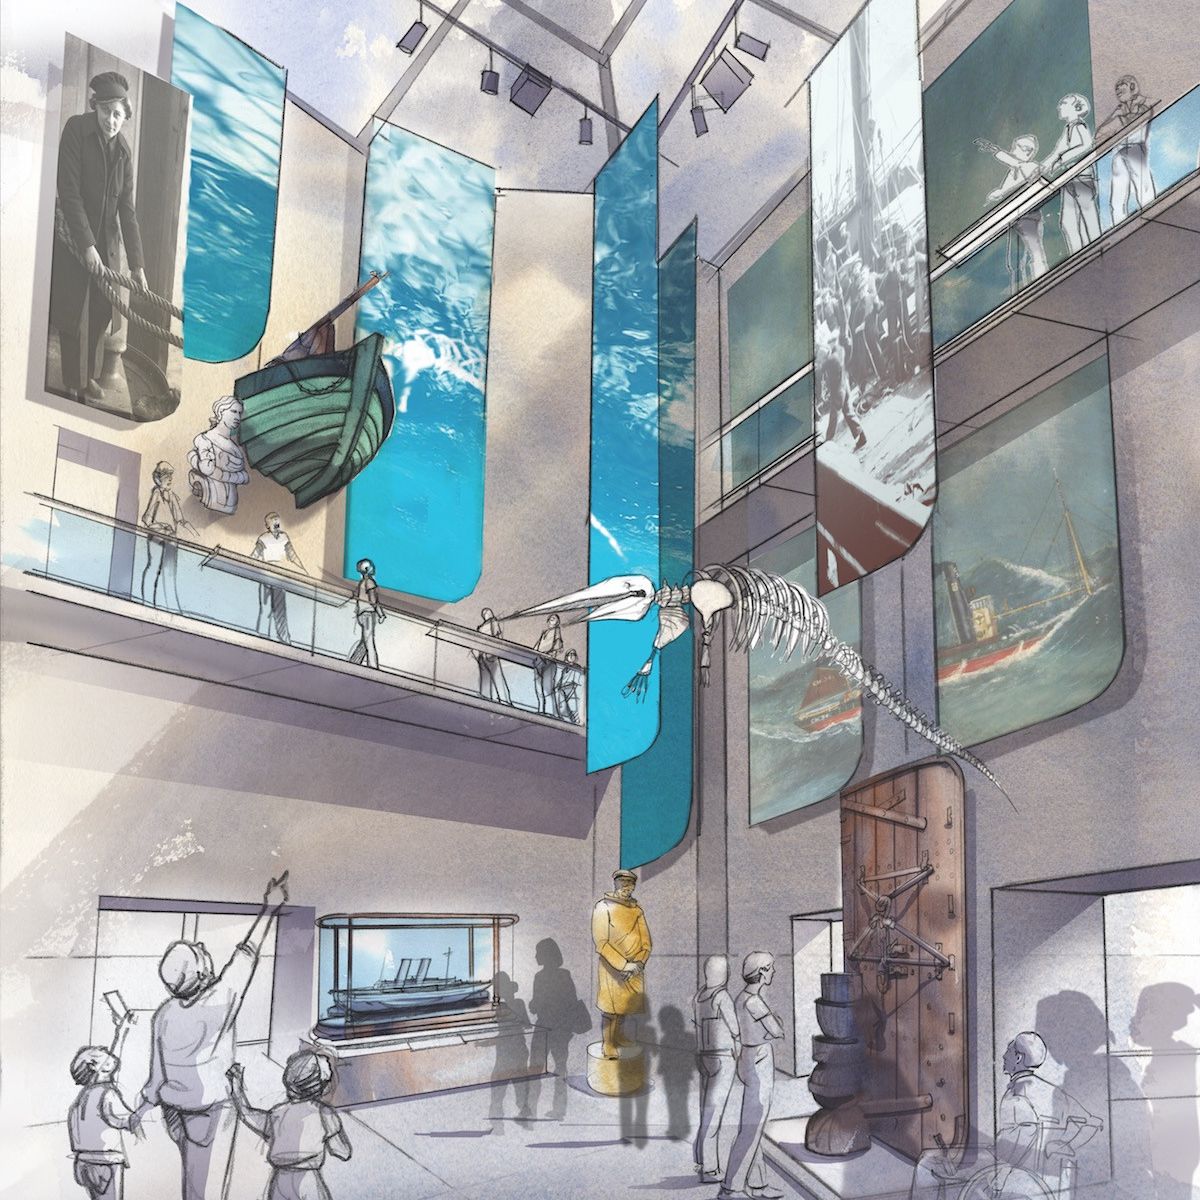 An artists' impression of the new Atrium at Hull Maritime Museum